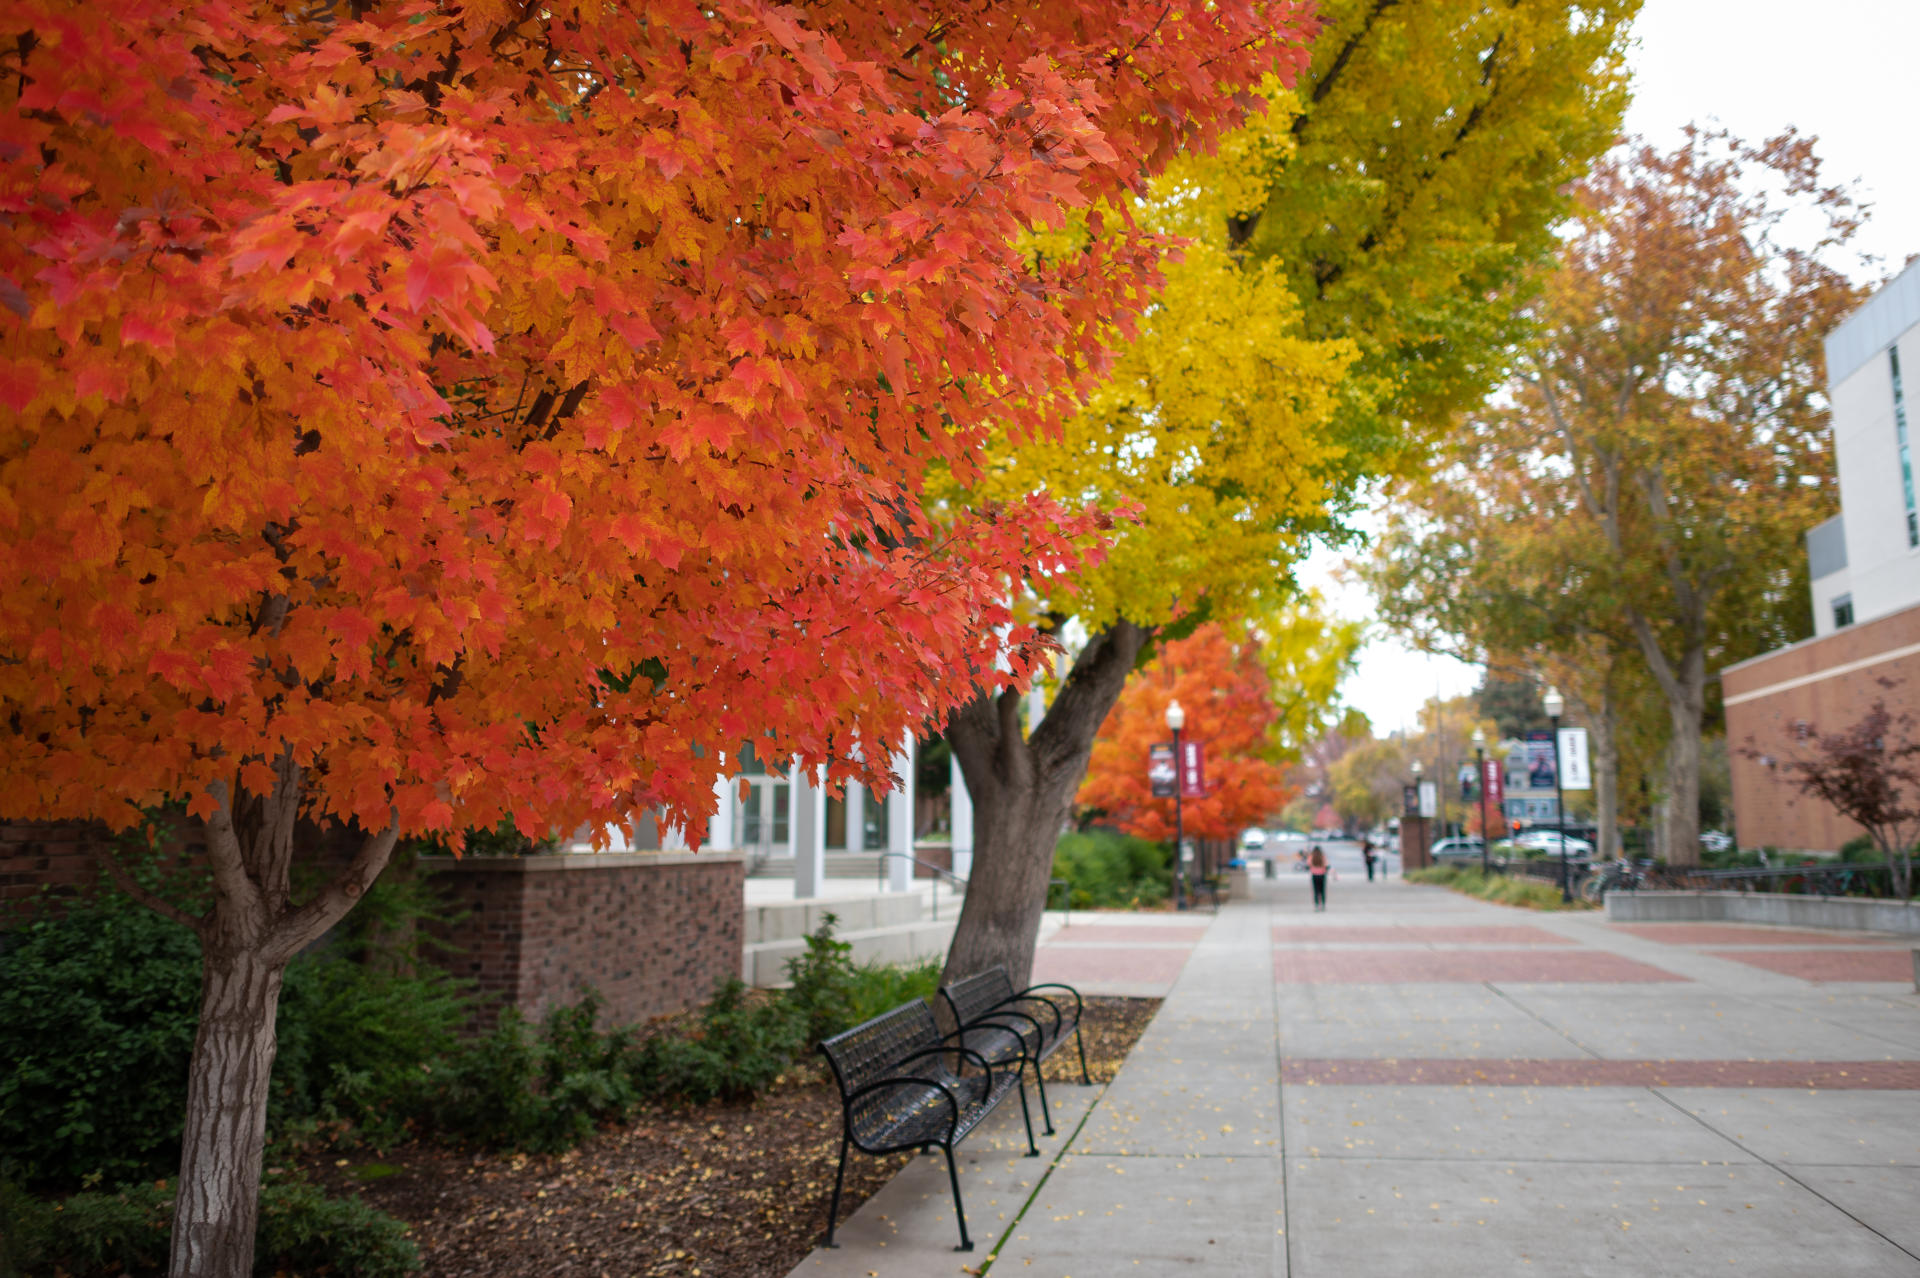 Beautiful fall foliage hangs over a pathway on a college campus.